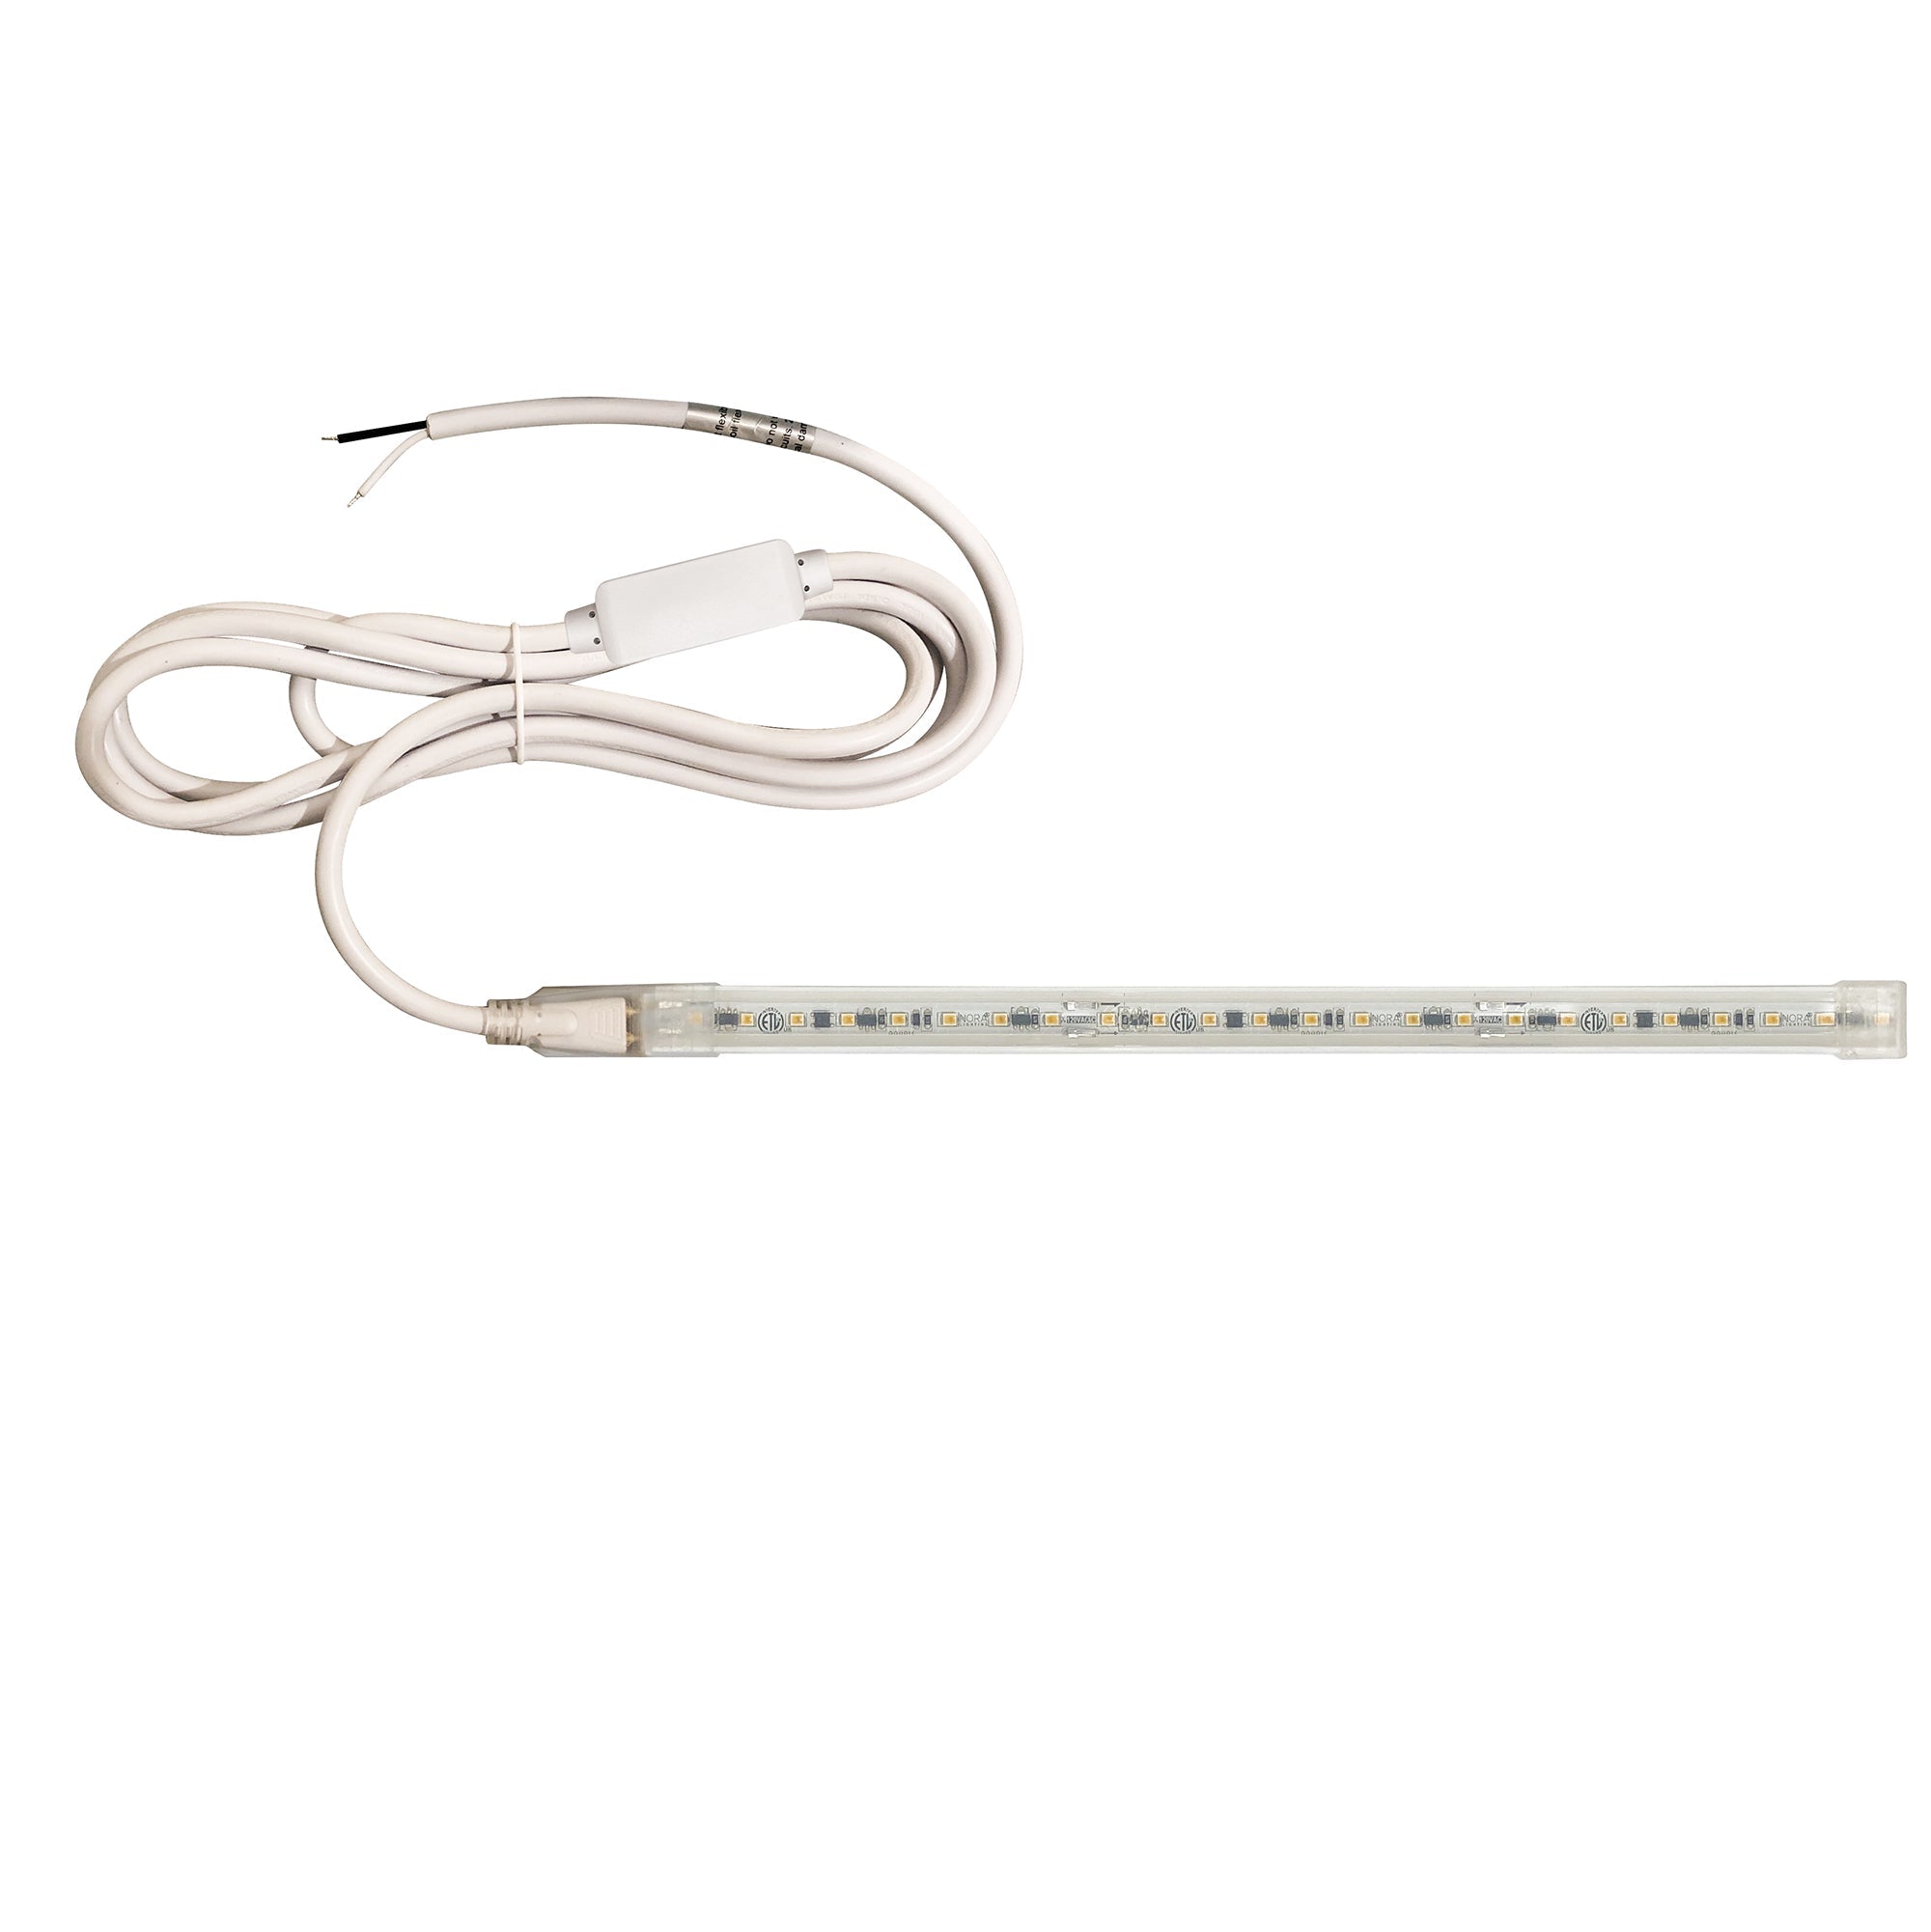 Nora Lighting NUTP13-W57-12-940/HWSP - Accent / Undercabinet - Custom Cut 57-ft 120V Continuous LED Tape Light, 330lm / 3.6W per foot, 4000K, w/ Mounting Clips and 8' Hardwired Power Cord w/ Surge Protector